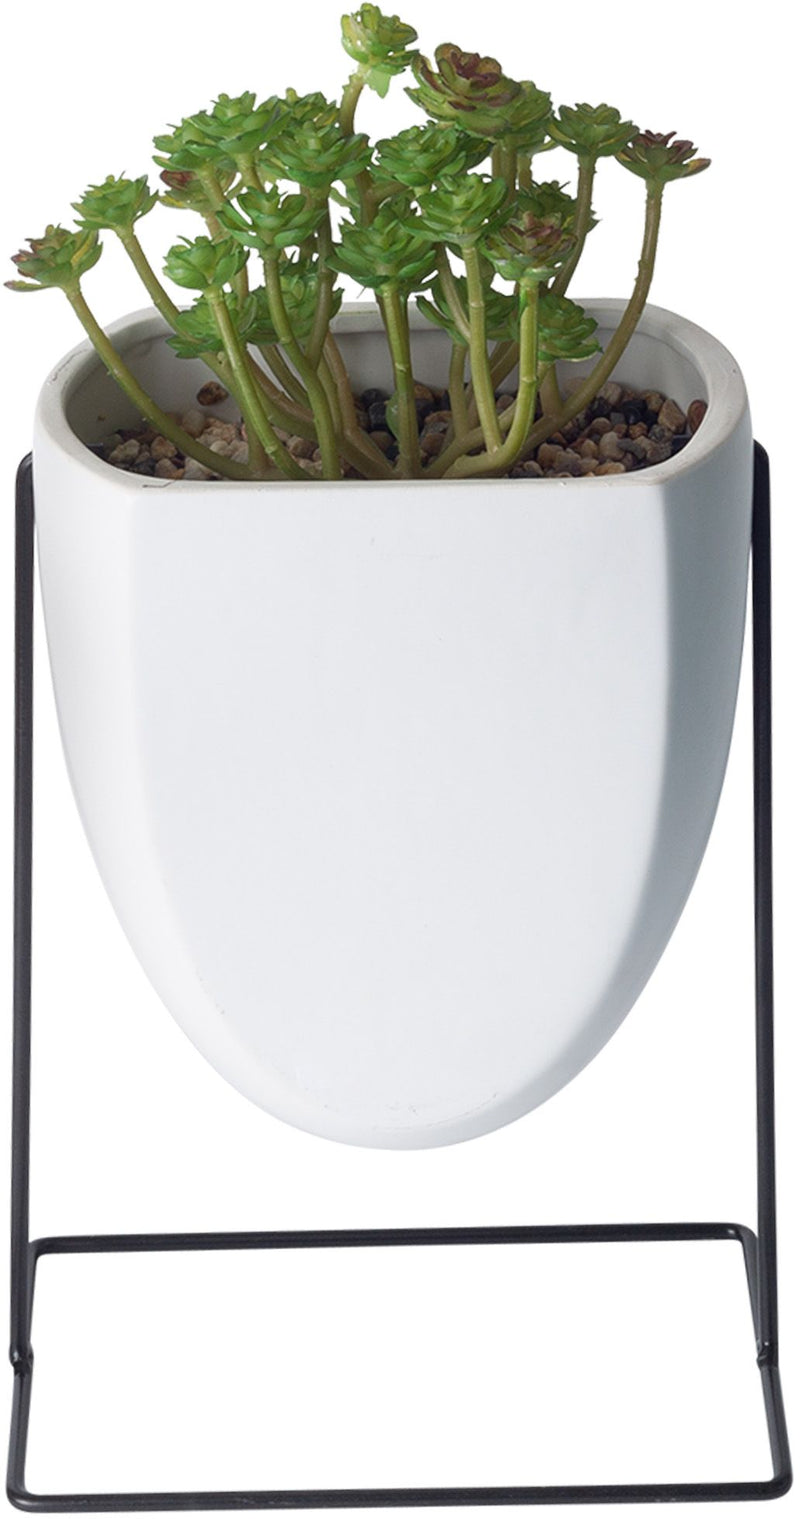 9"H WHITE PLANTER SUCCULENT ON METAL STAND